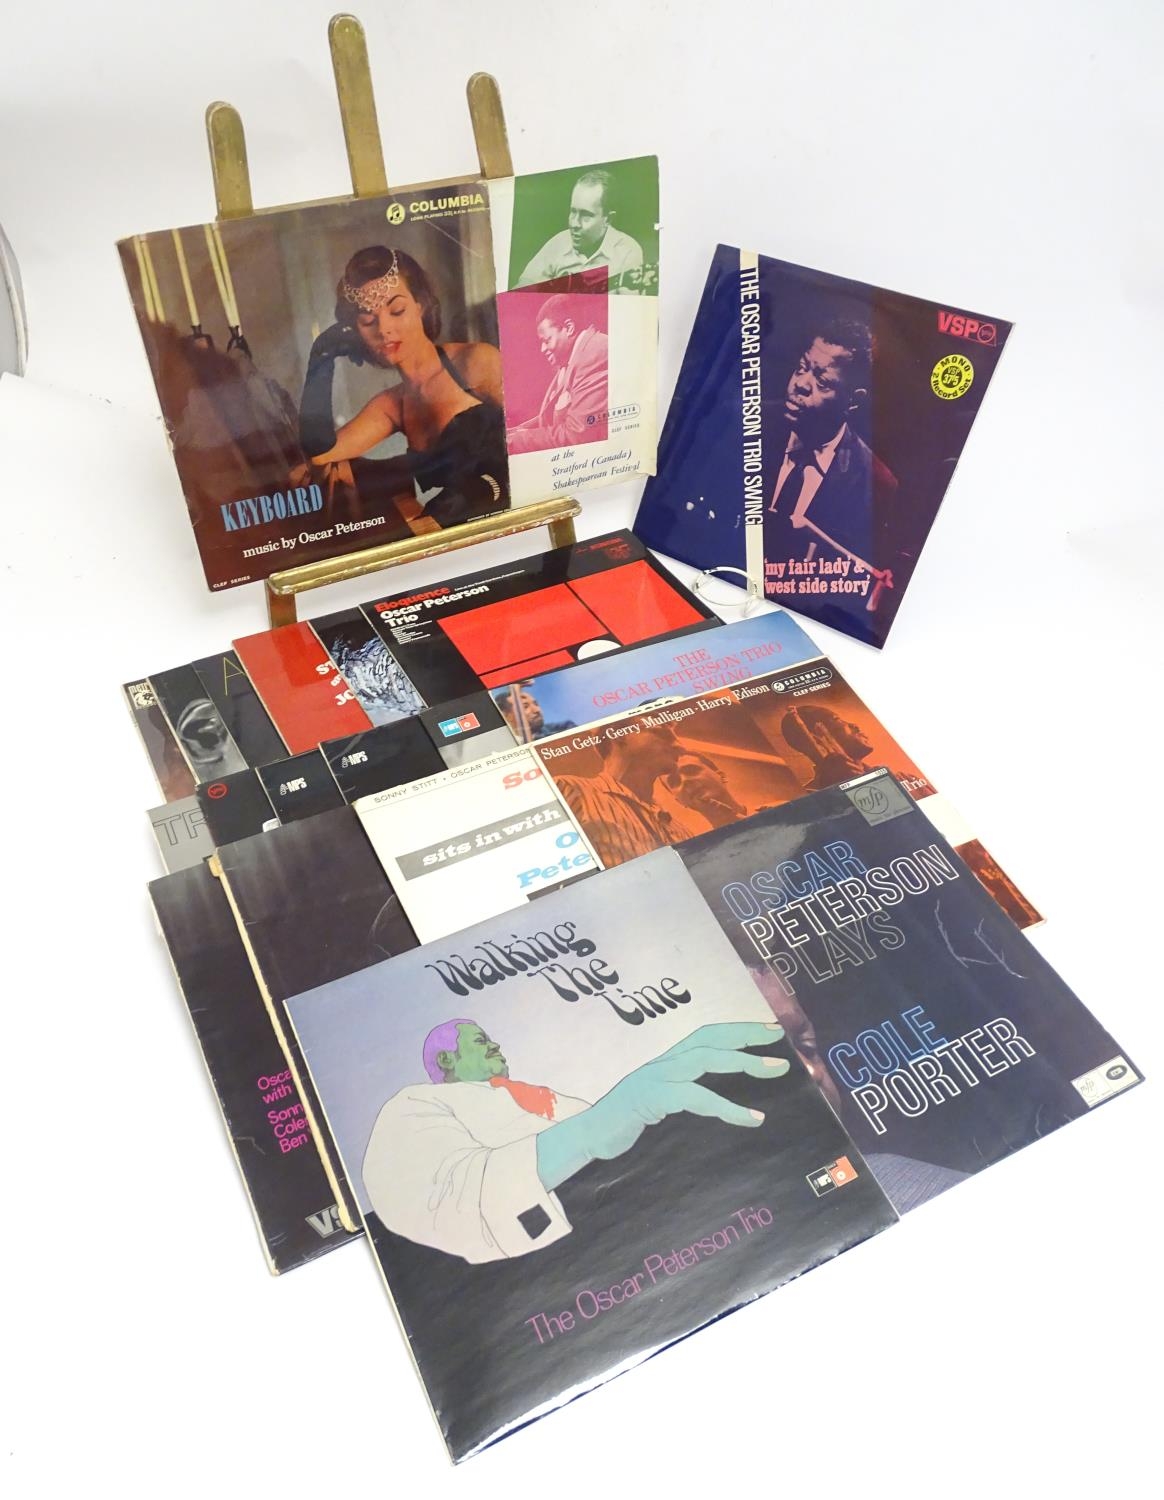 A collection of 20thC 33 rpm Vinyl records / LPs - Jazz, comprising: Oscar Peterson: Keyboard, The